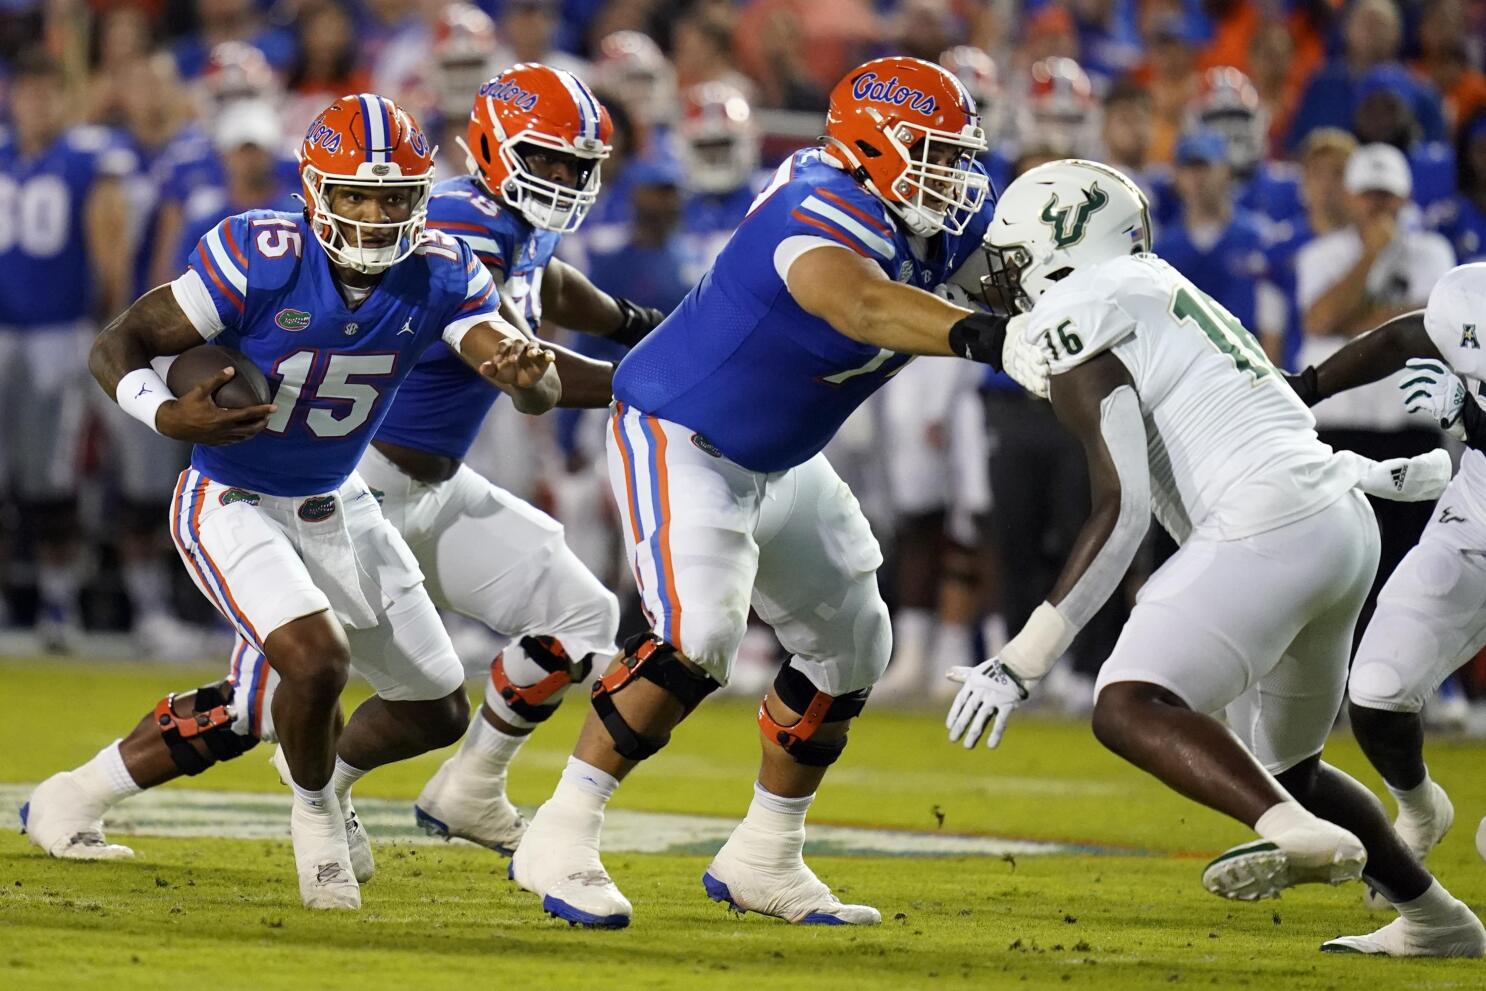 Florida turns away Tennessee after losing quarterback Jeff Driskel